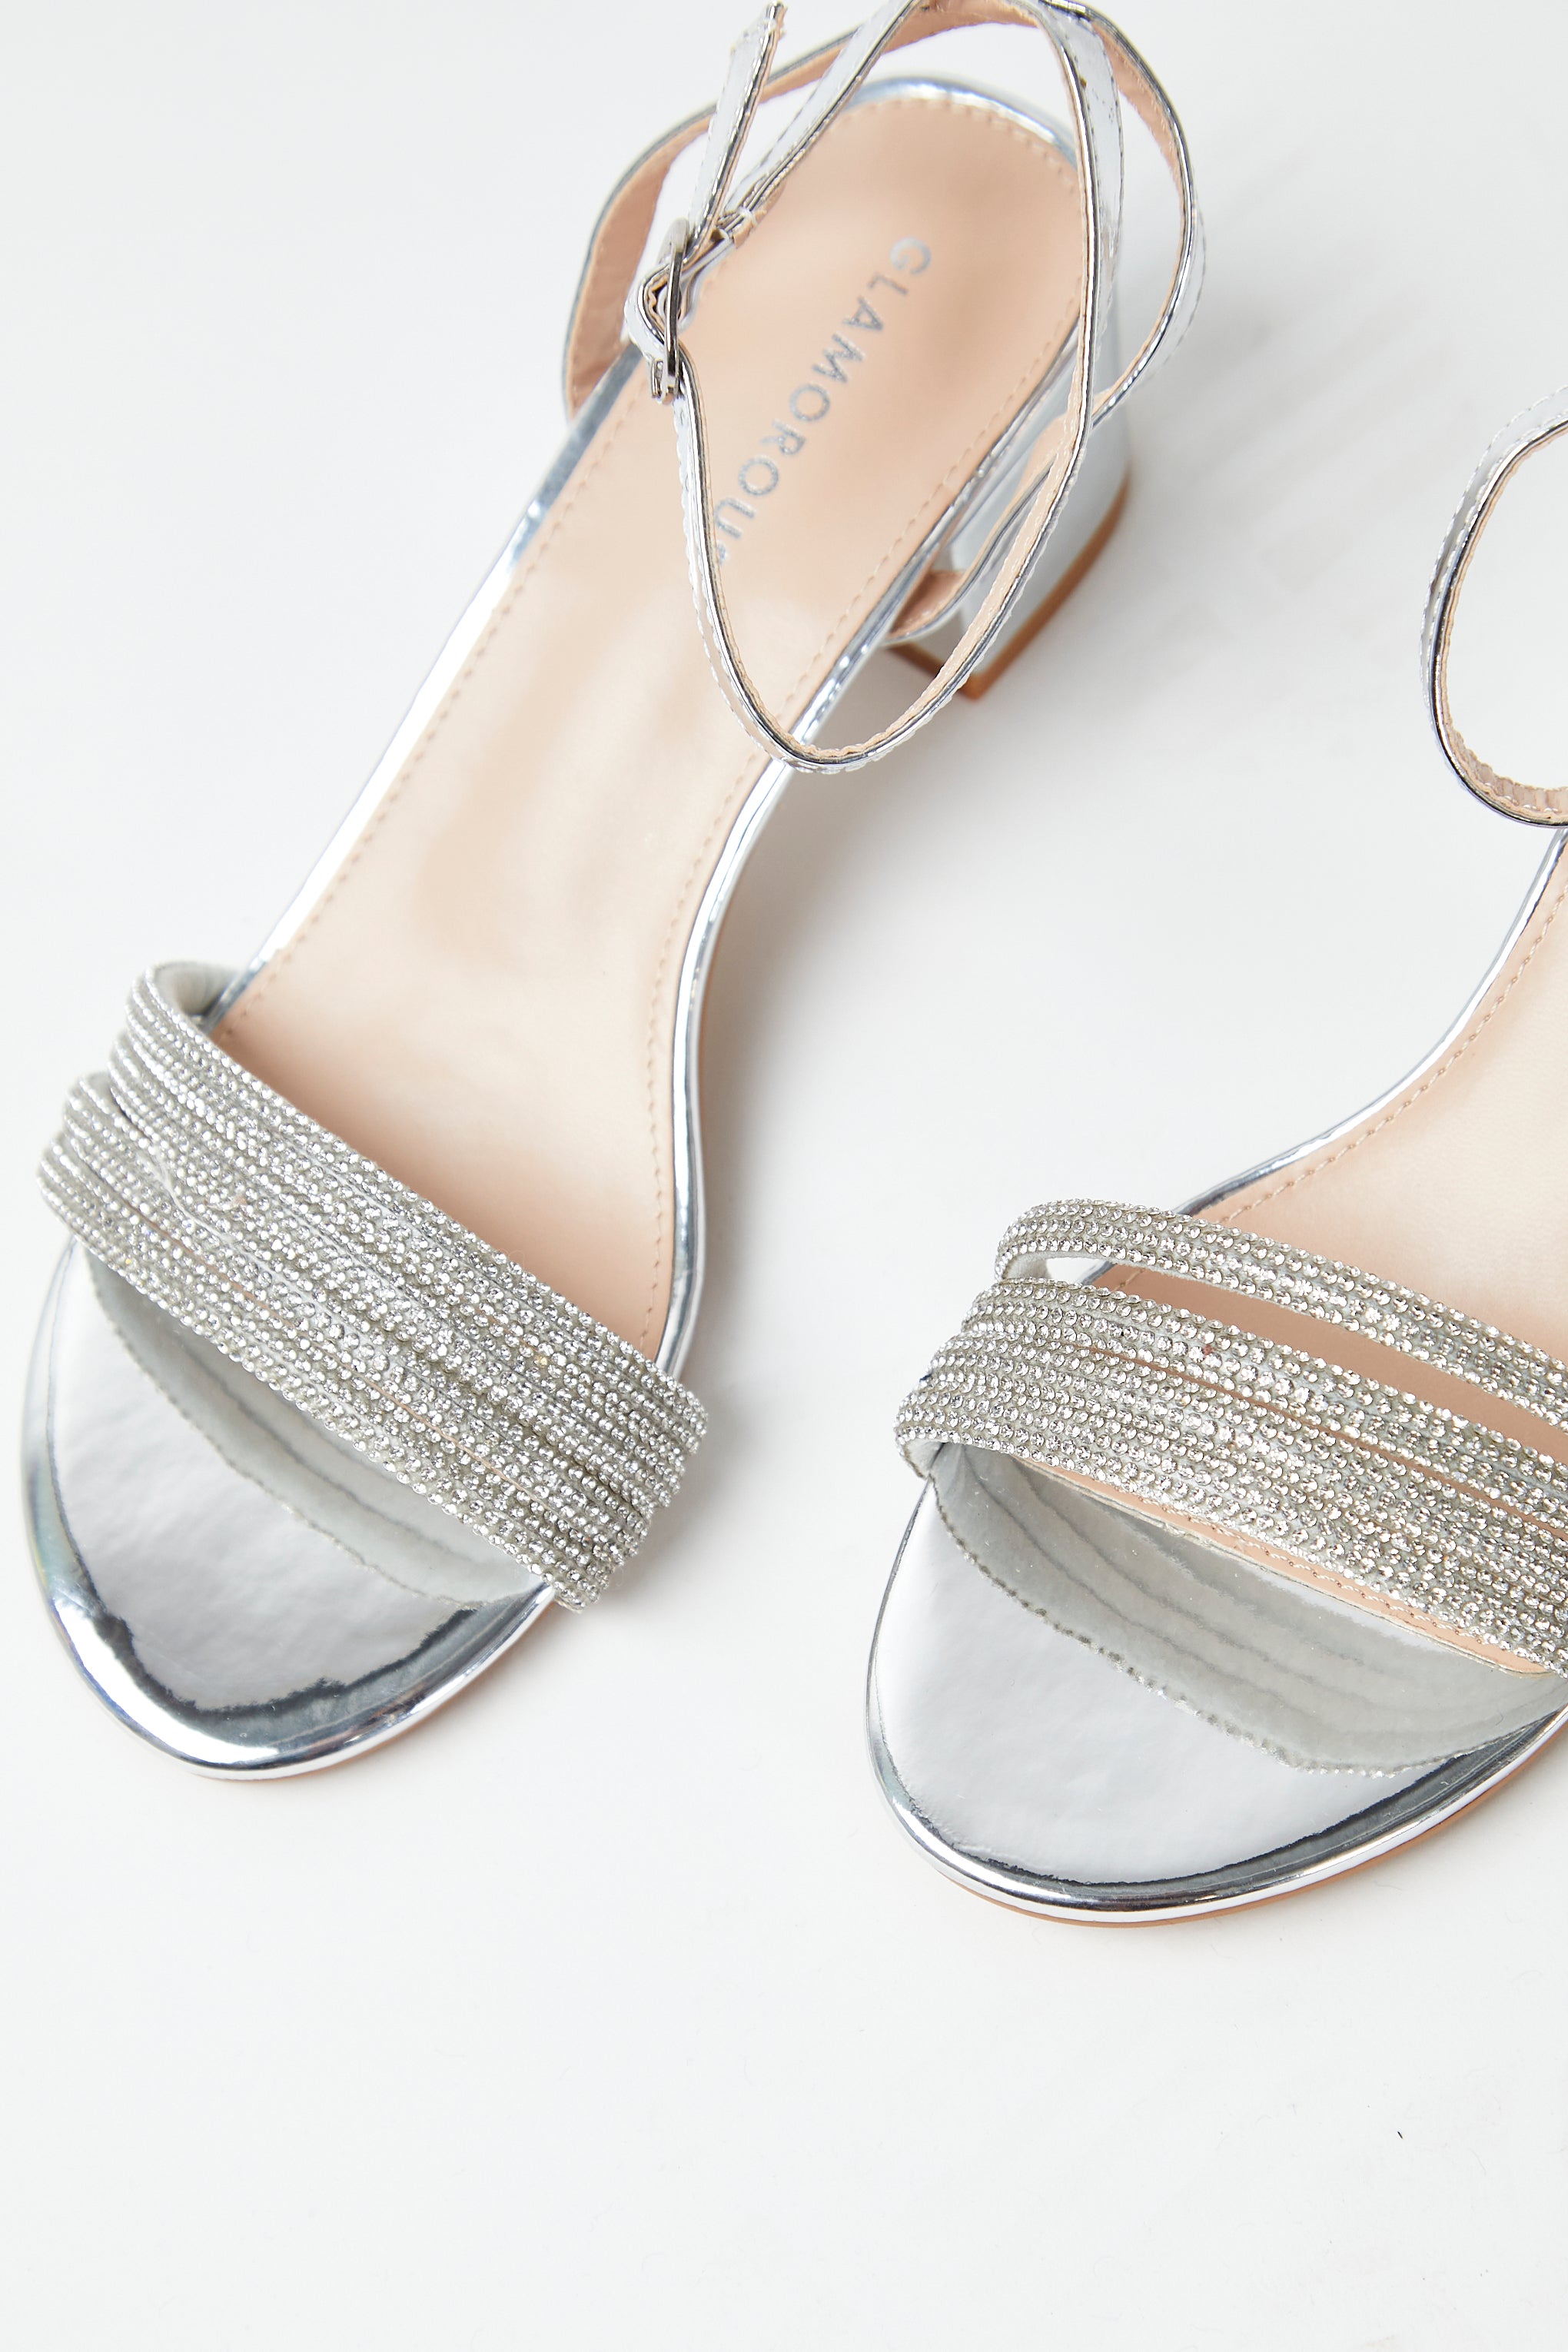 Silver Glitter 'Etta' Wide Fit Low Heel Ankle Strap Sandals by Paradox  London | Look Again